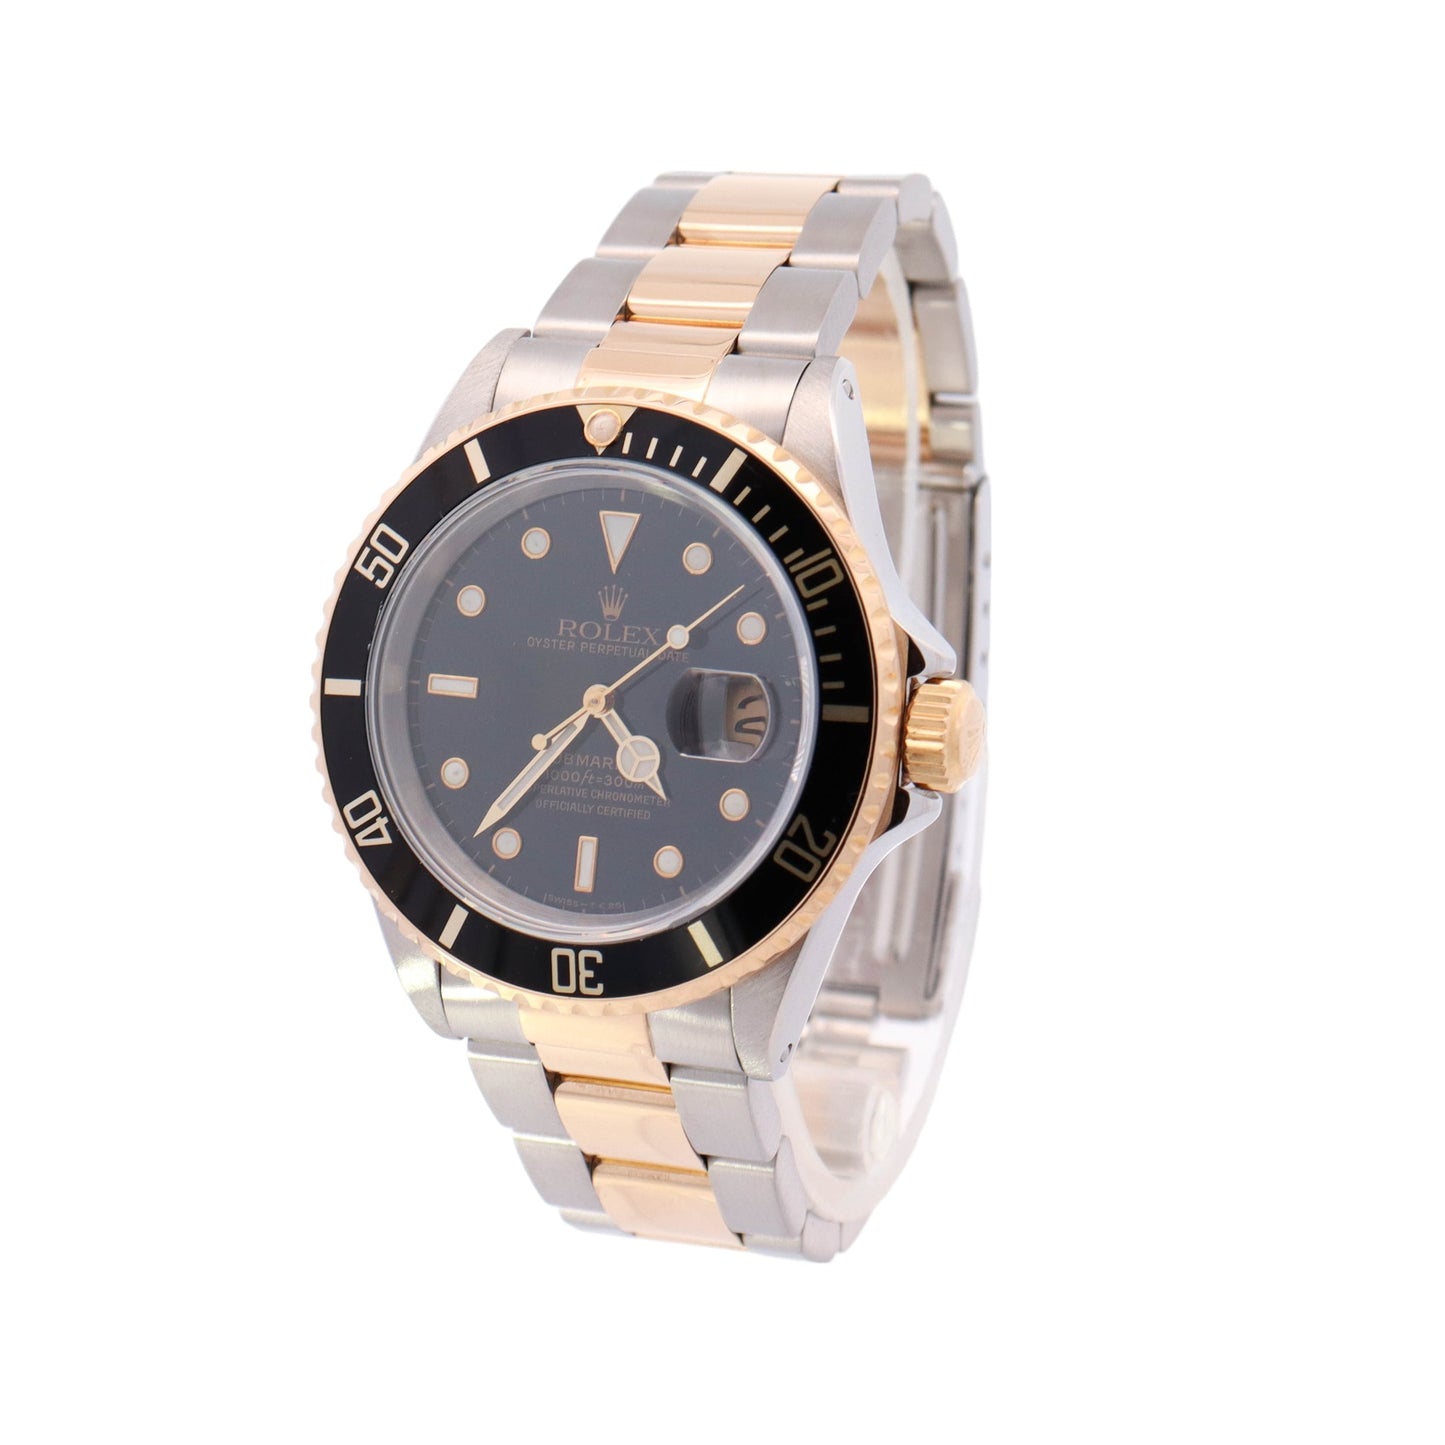 Rolex Submariner Two-Tone Stainless Steel & Yellow Gold 40mm Black Dot Dial Watch Reference# 16613 - Happy Jewelers Fine Jewelry Lifetime Warranty